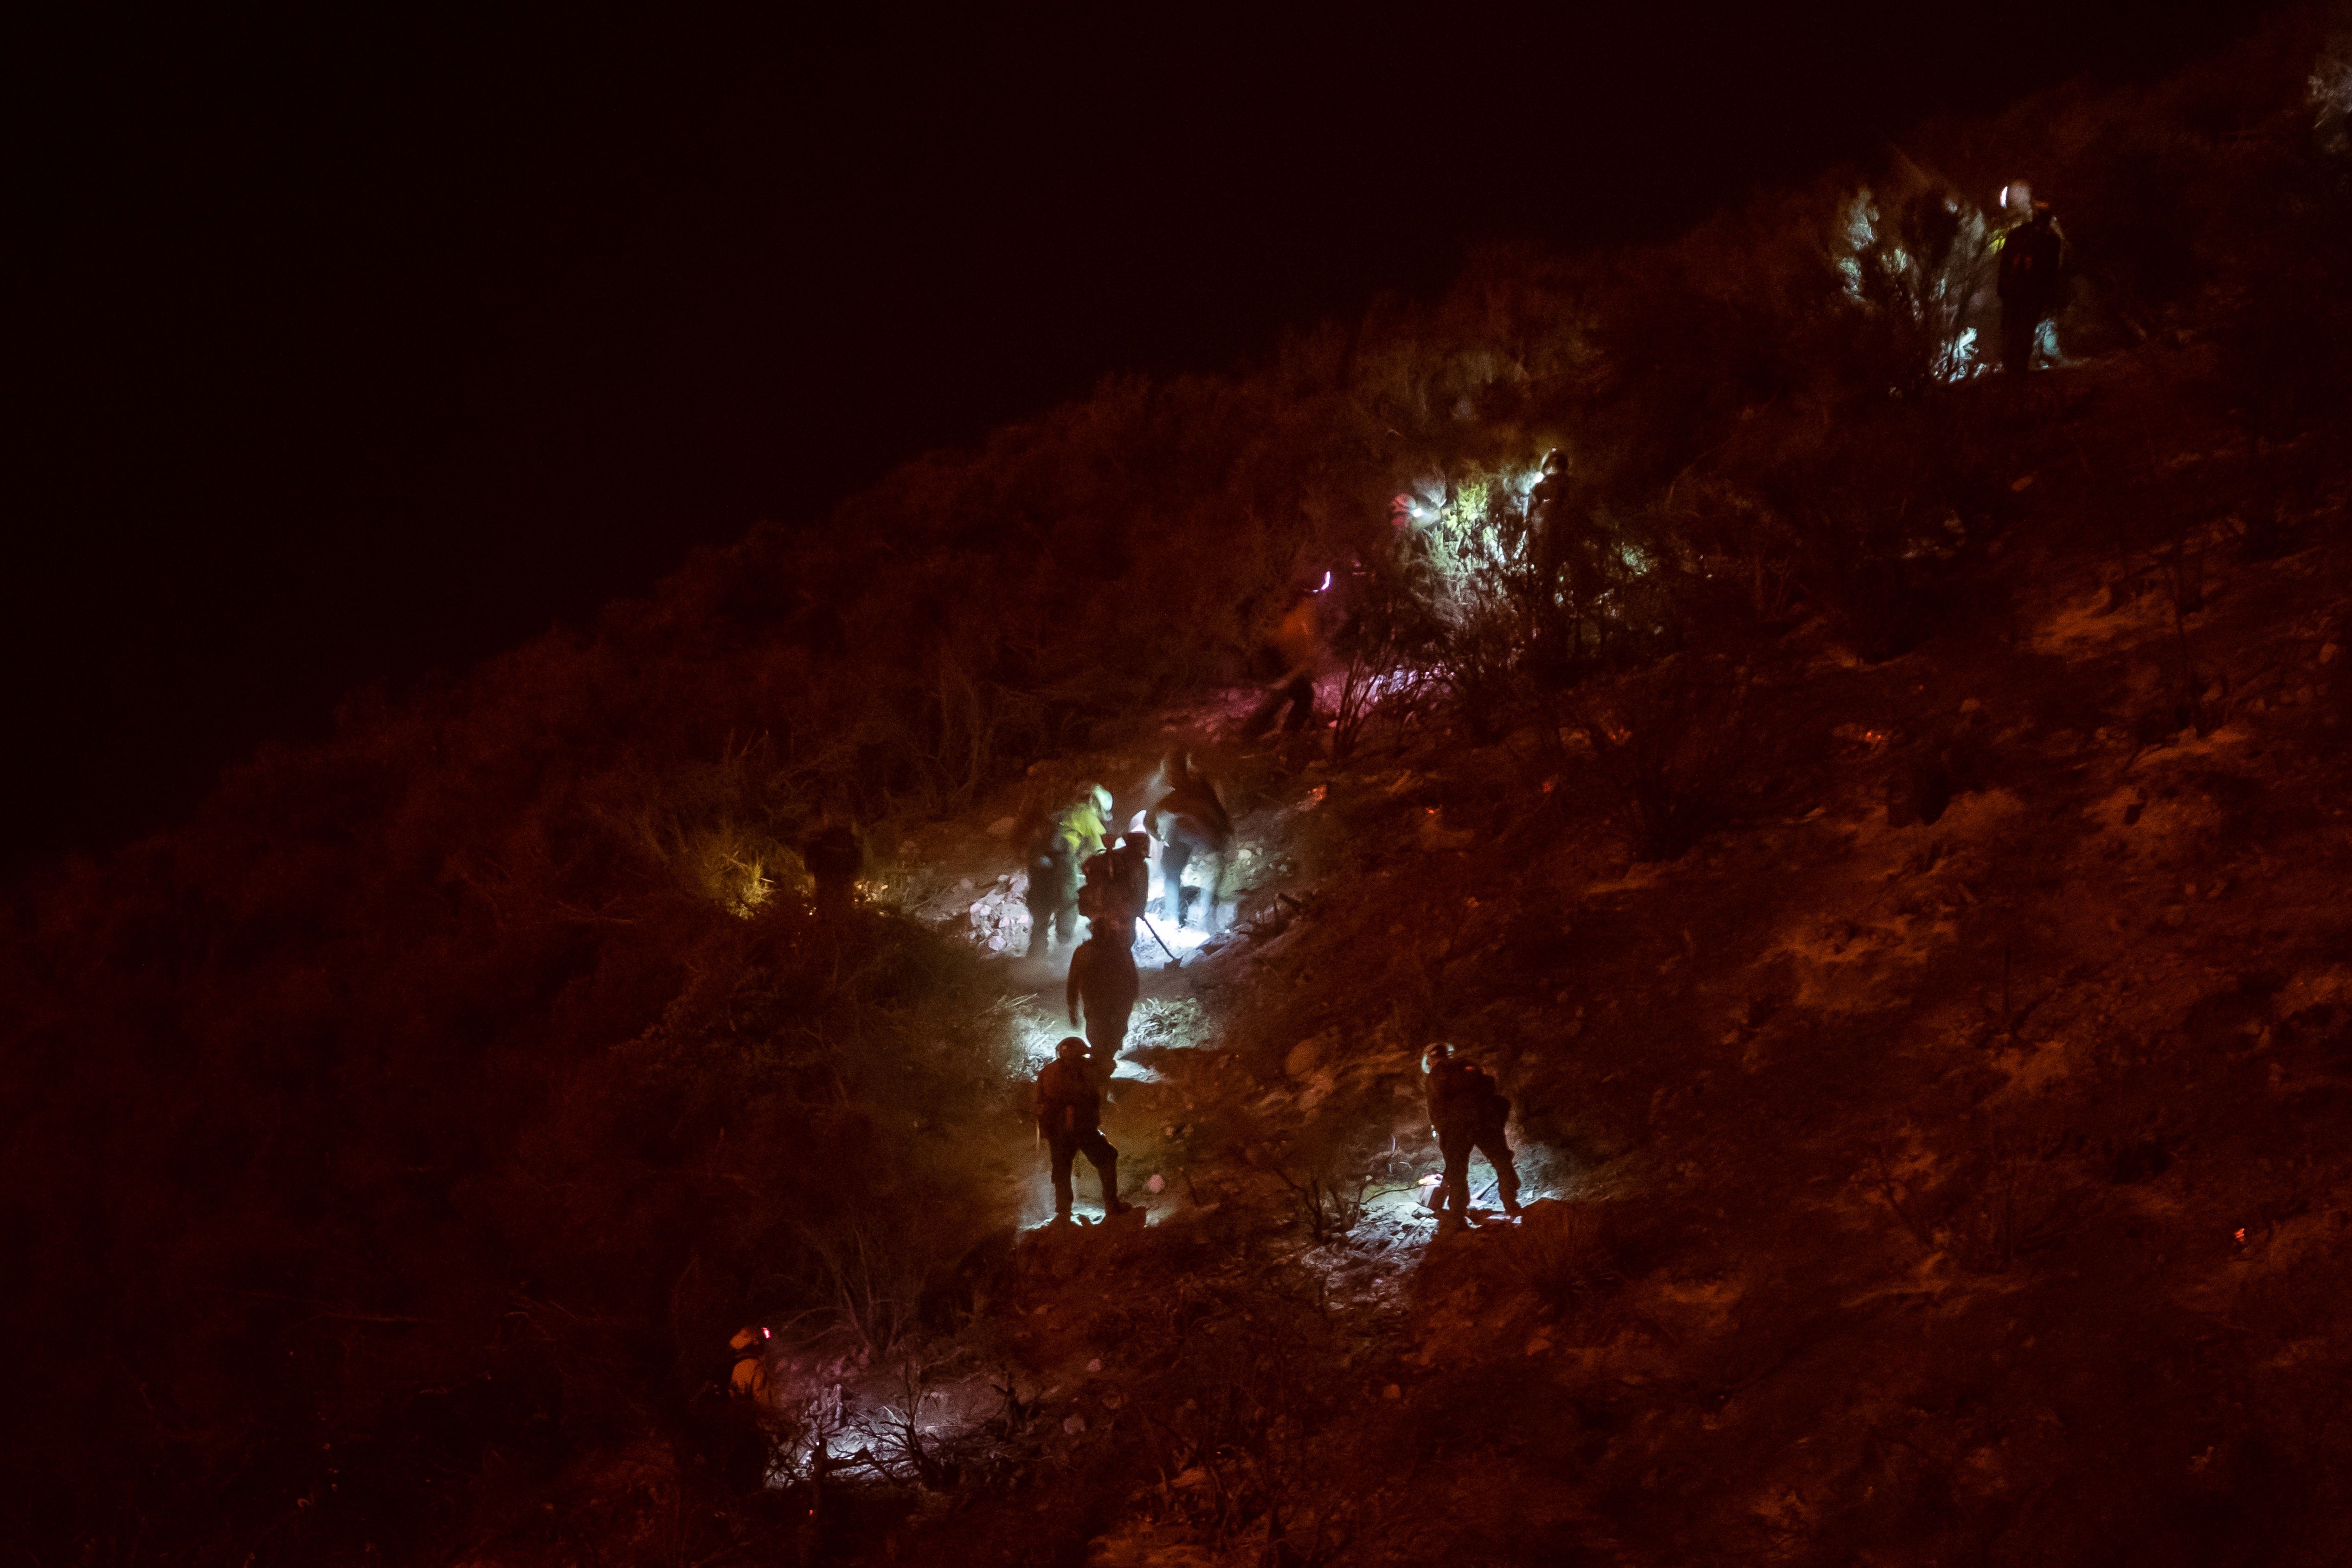 Firefighters work at night cutting trees and removing vegetation in order to make a firebreak as they battle the Lake Fire 